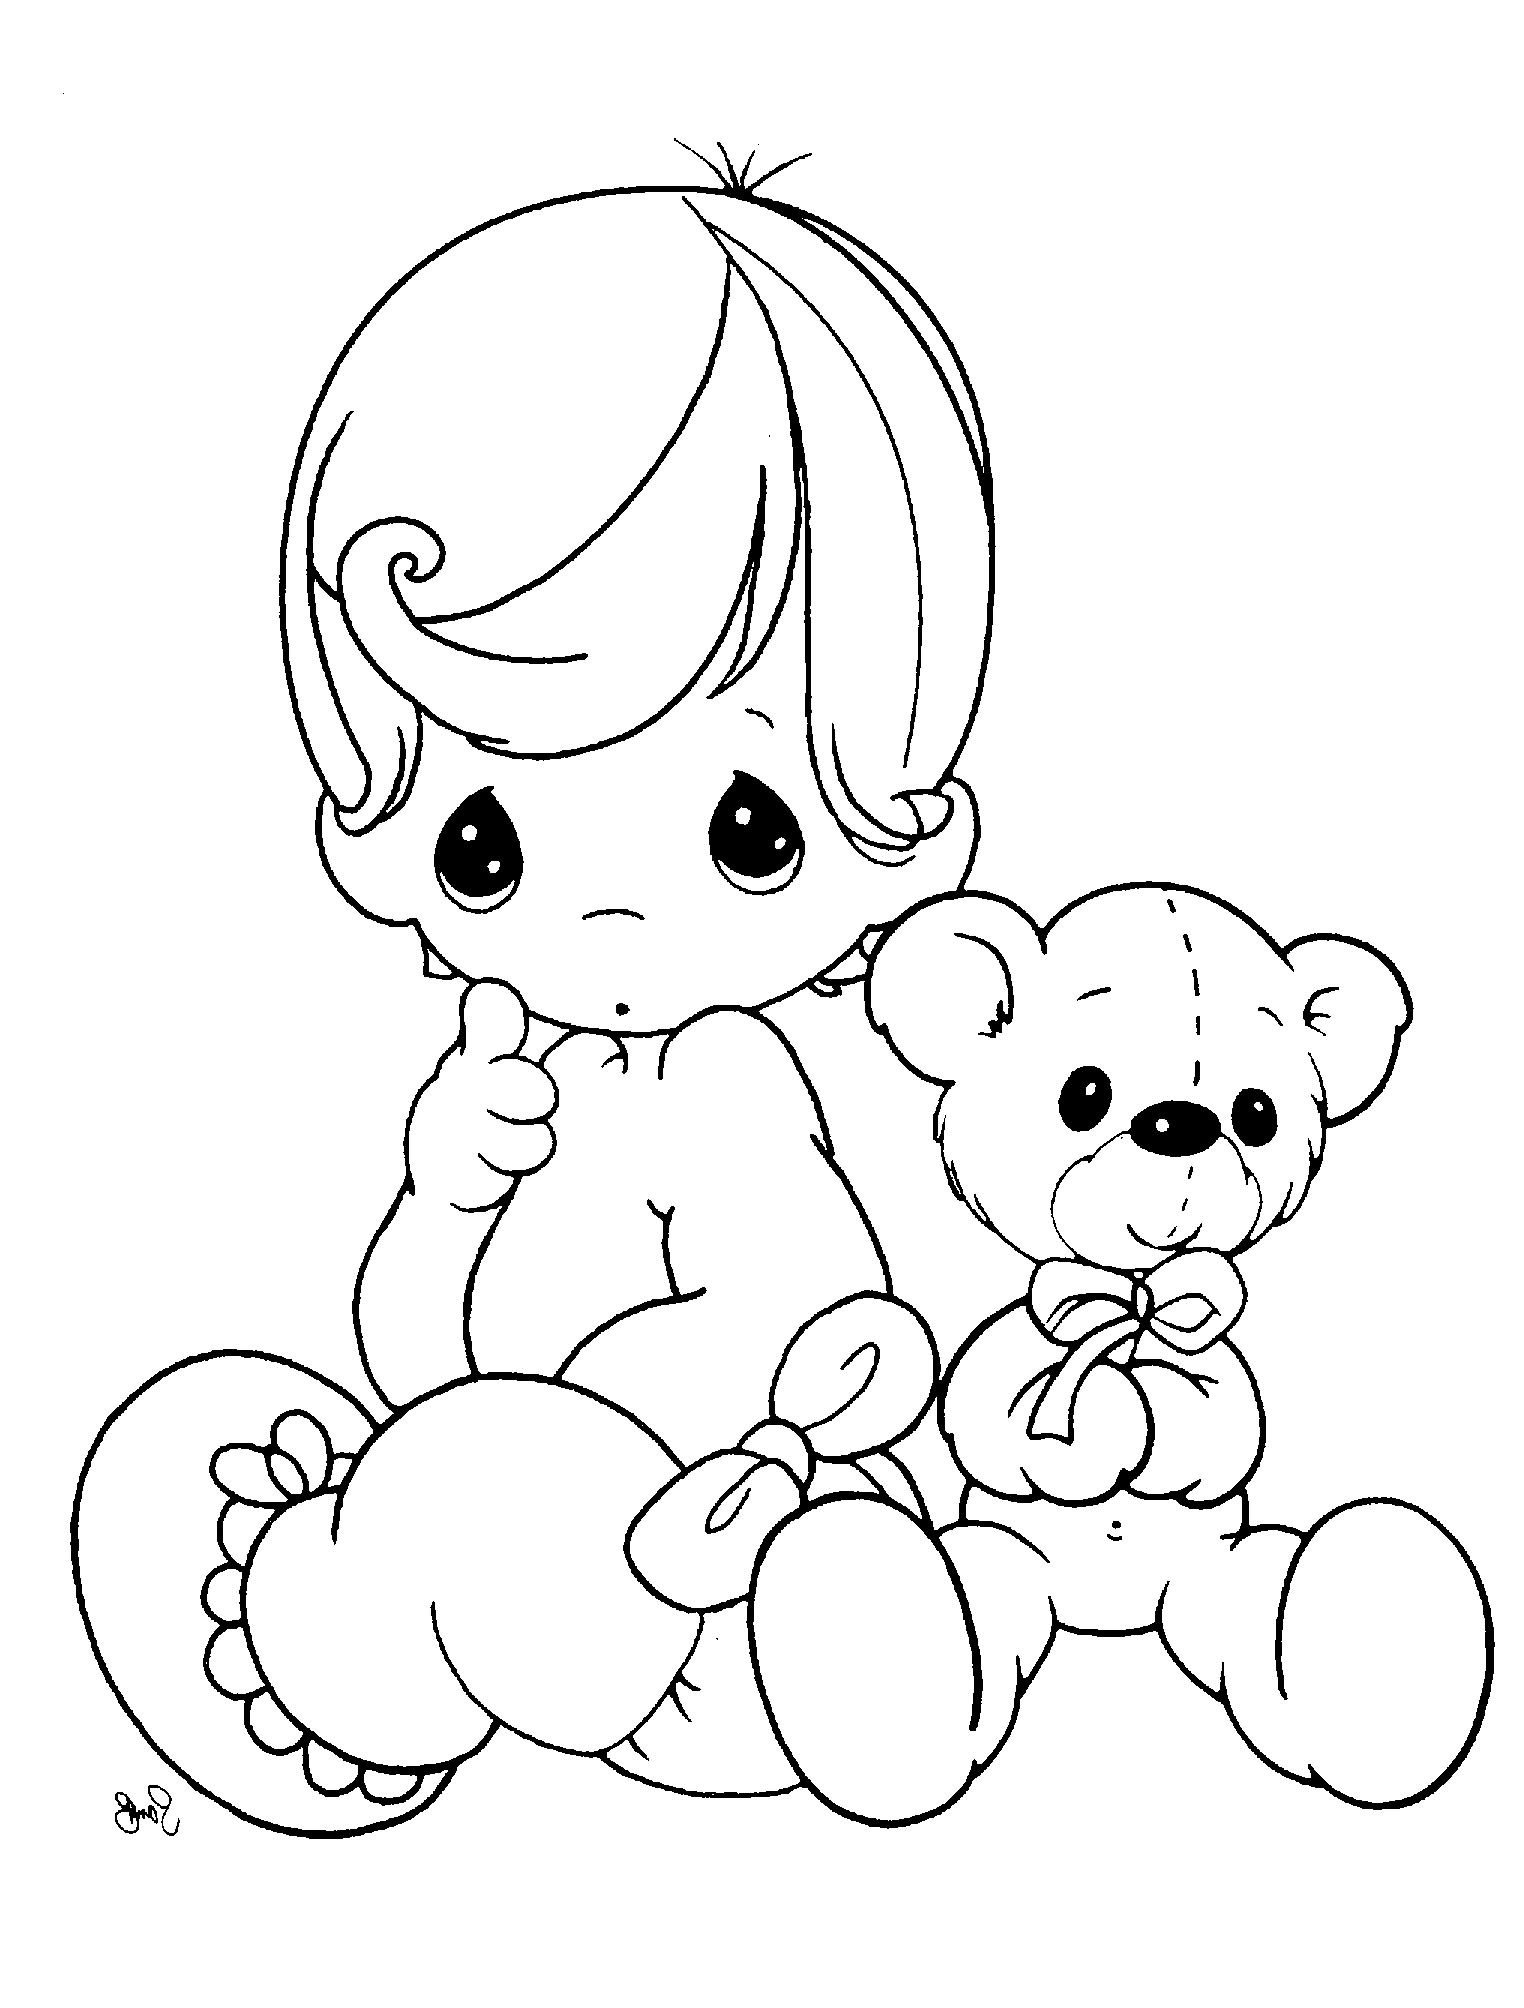 Baby Doll Coloring Page
 Baby Doll Drawing at GetDrawings